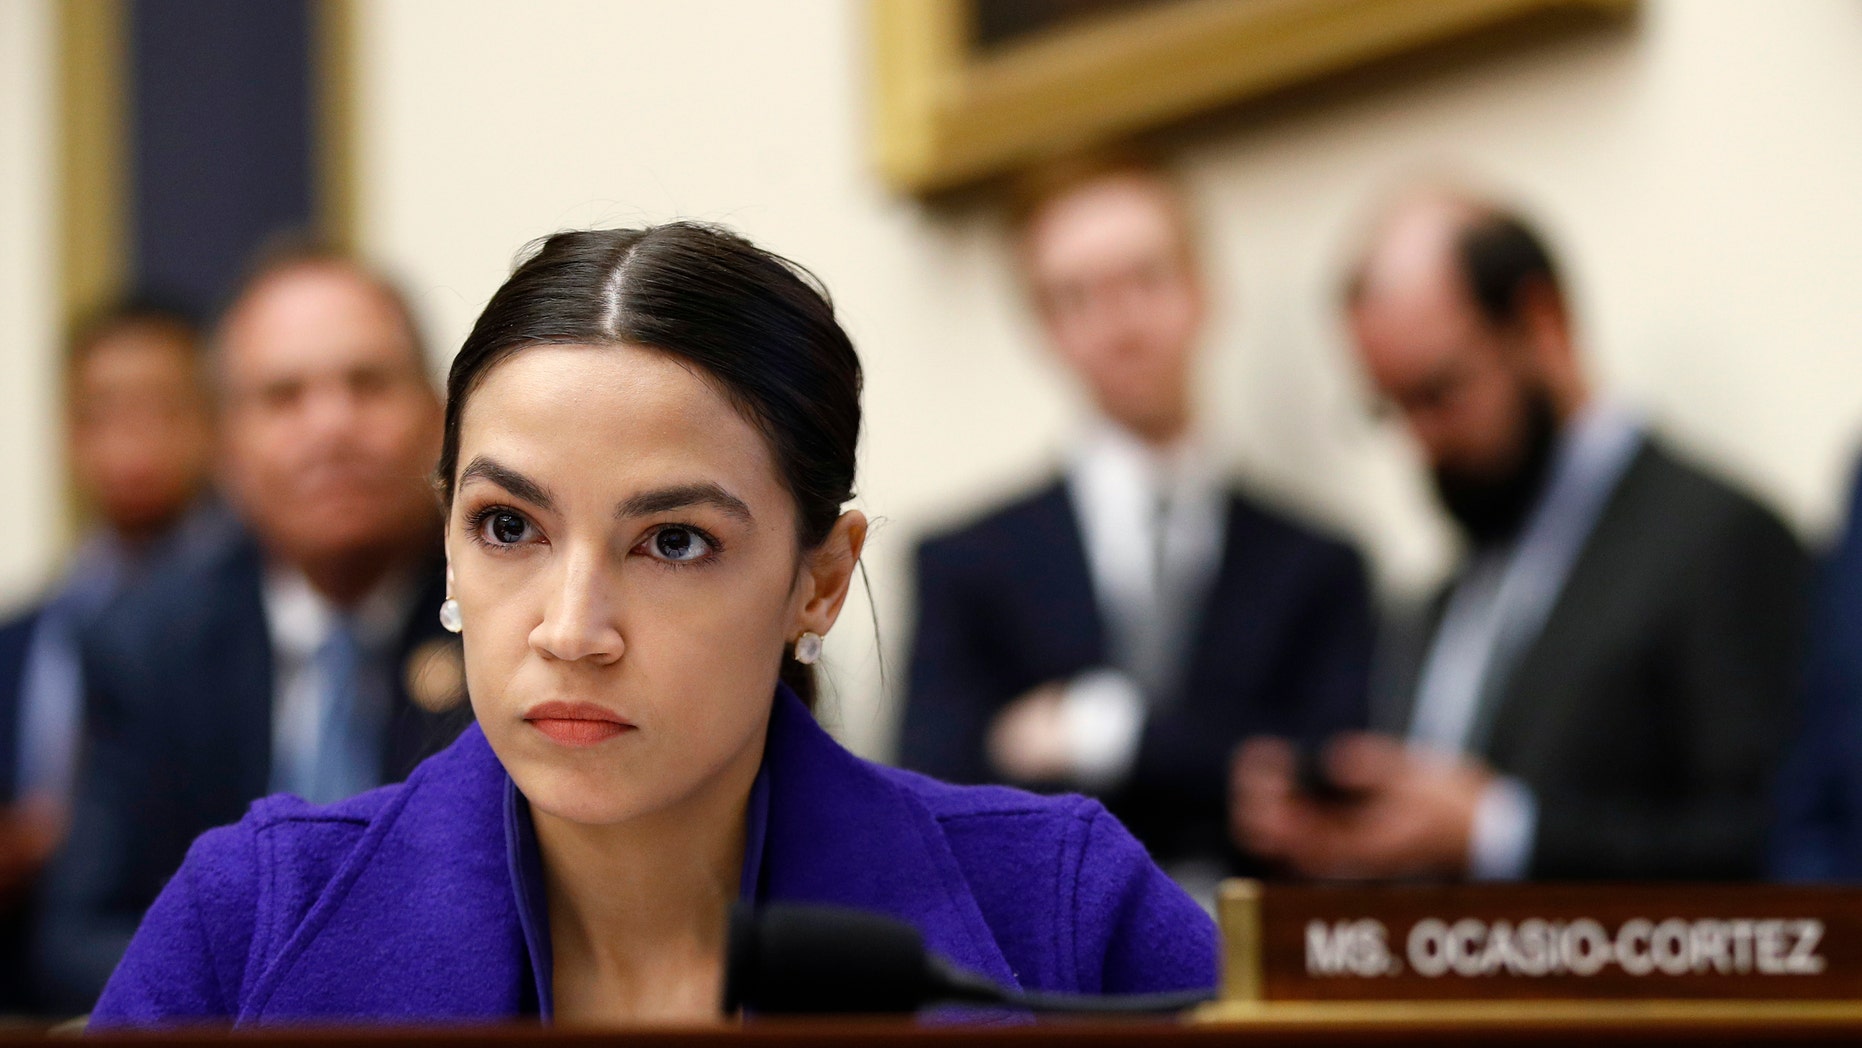 Rep. Alexandria Ocasio-Cortez, D-N.Y., Listening to a Hearing of the House Financial Services Committee with the Leaders of the Capitol's Leading Banks in Washington. (Associated Press)